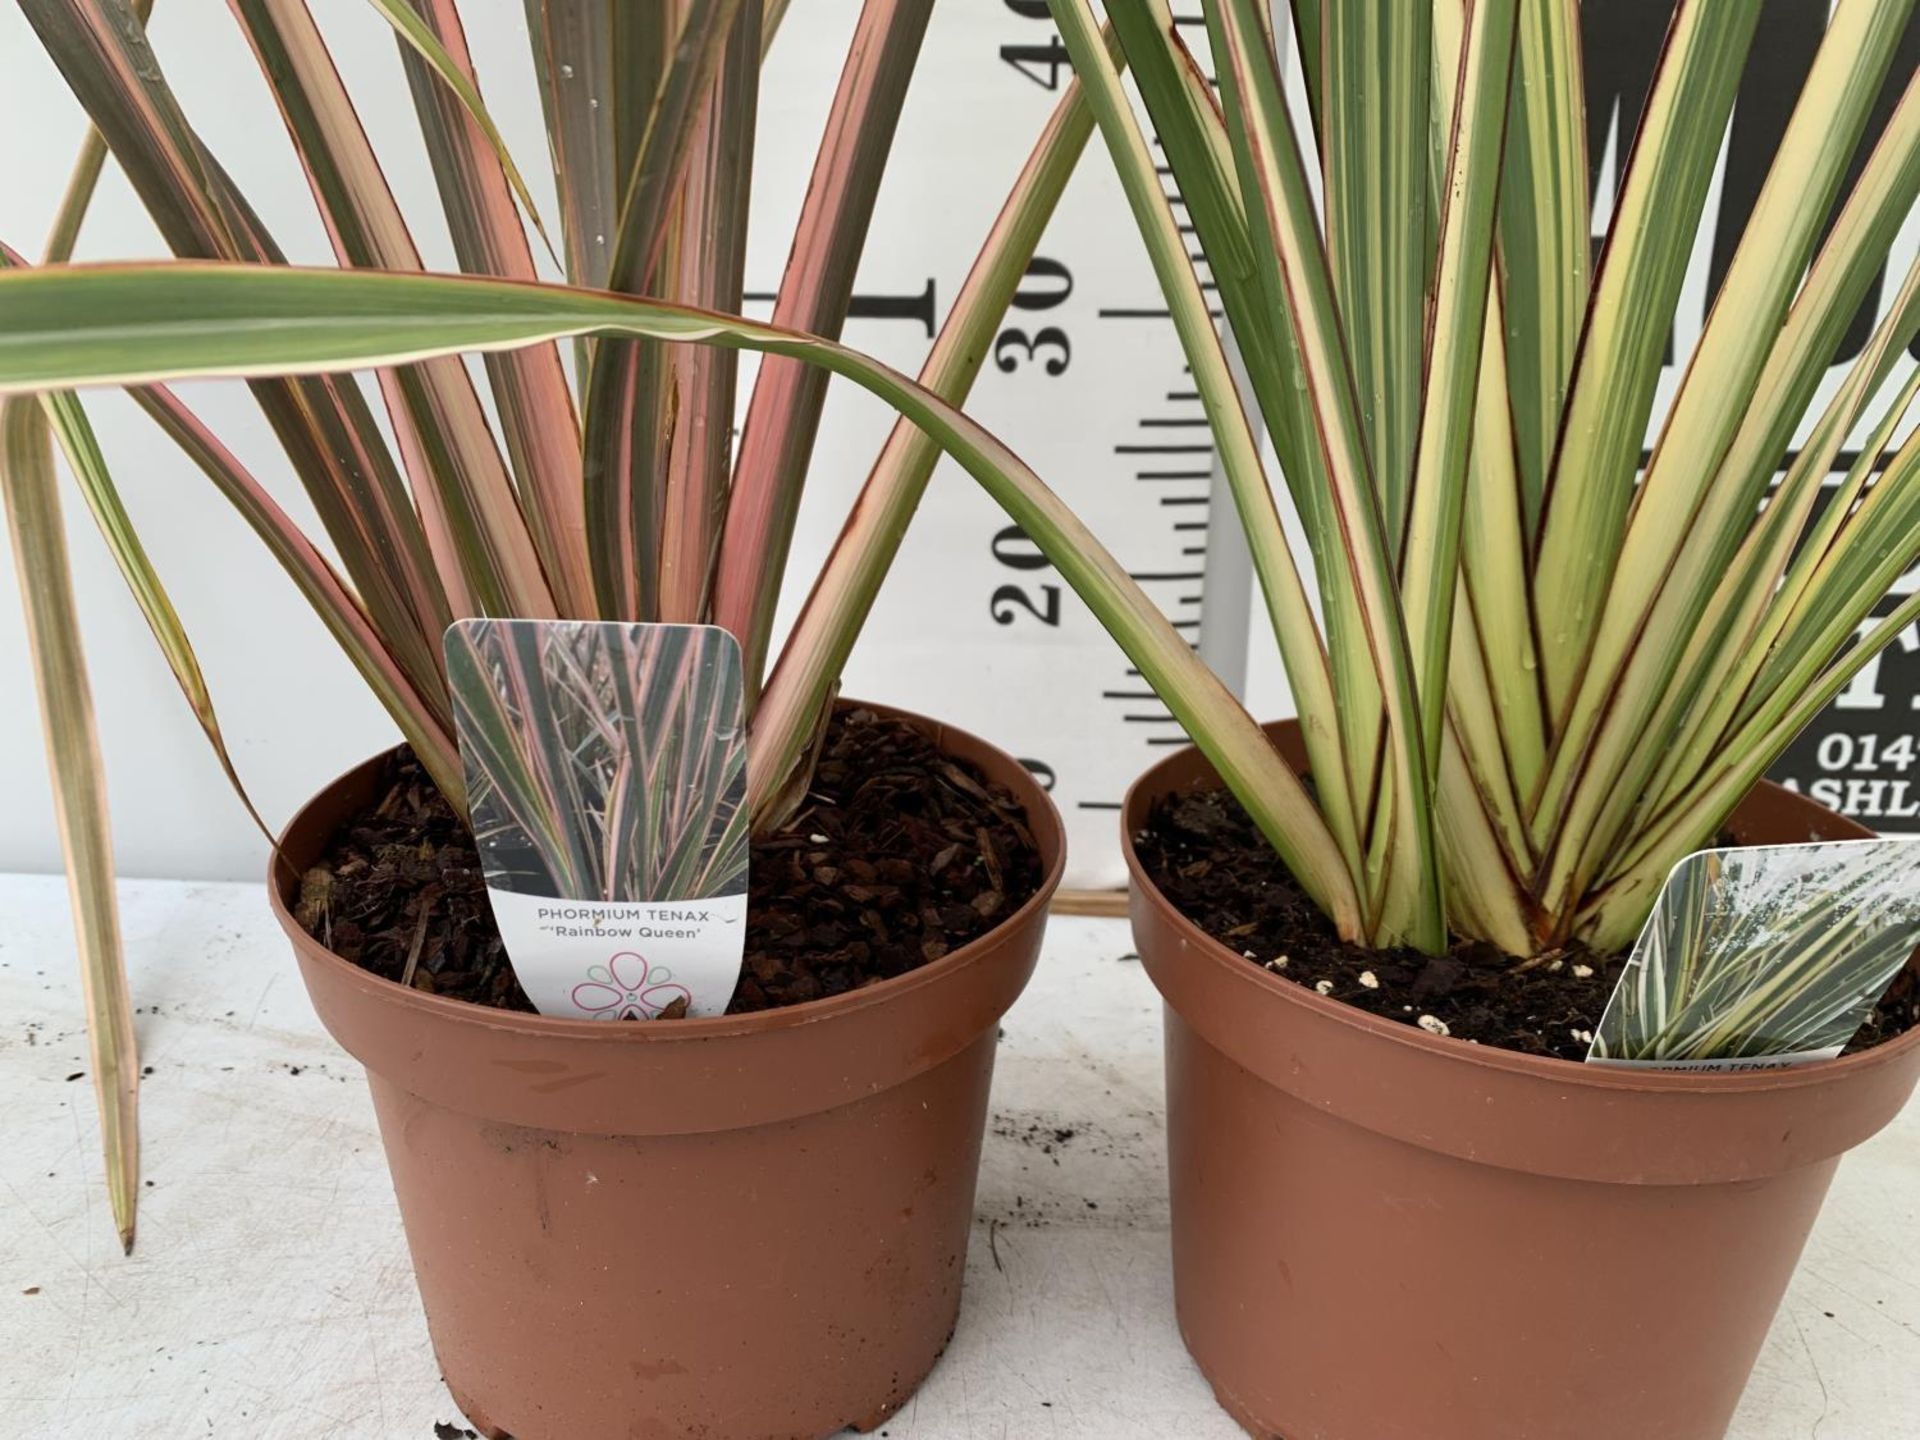 TWO PHORMIUM TENAX PLANTS 'TRICOLOUR' AND 'RAINBOW QUEEN' APPROX ONE METRE IN HEIGHT IN 3LTR POTS - Image 6 of 8